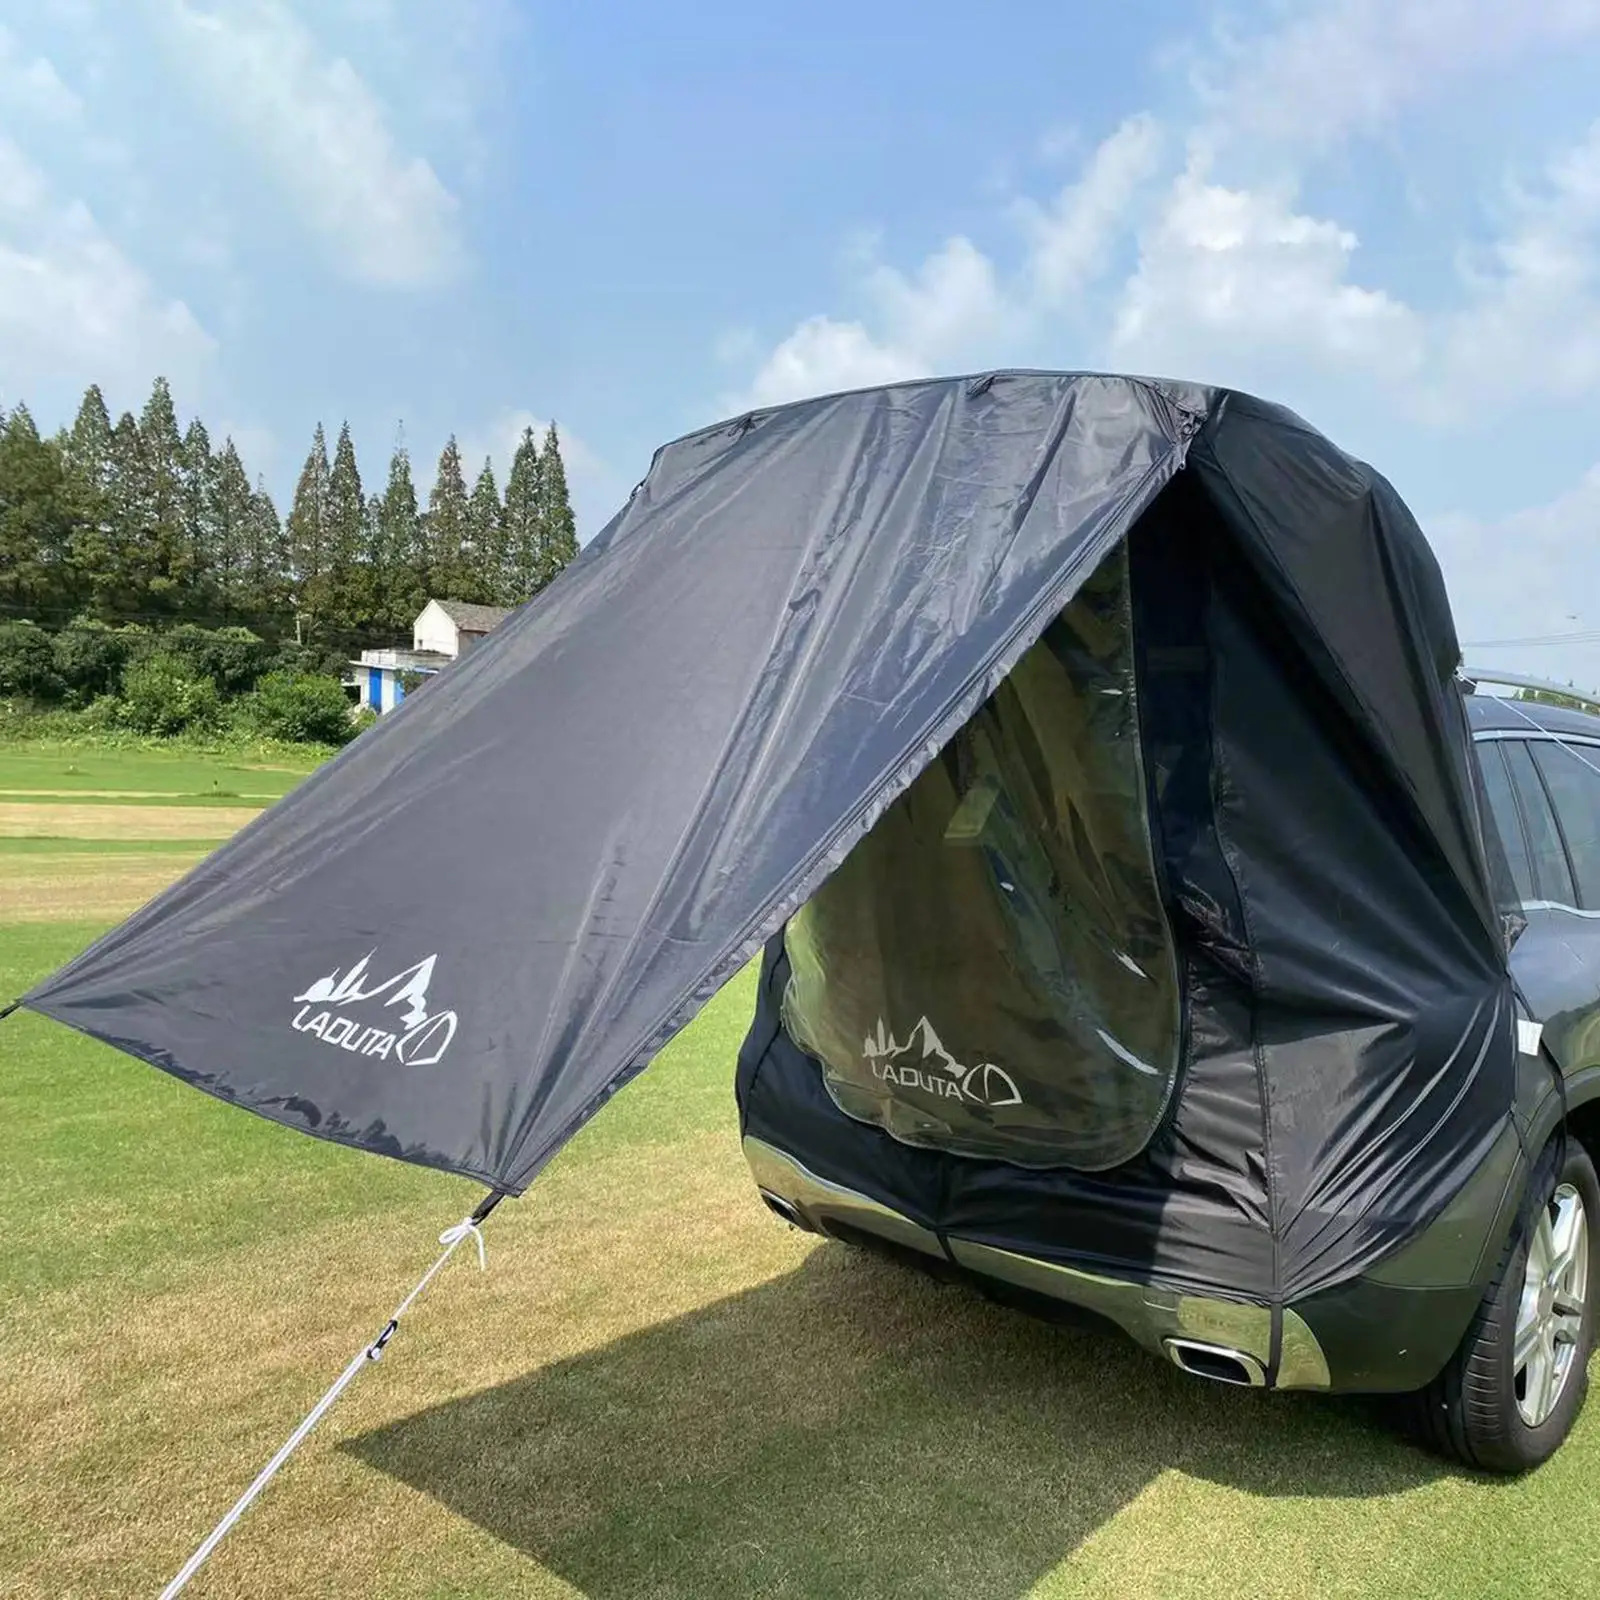 Waterproof Car Awning , Portable Canopy Camper Trailer  for Camping, S, Outdoor Hiking